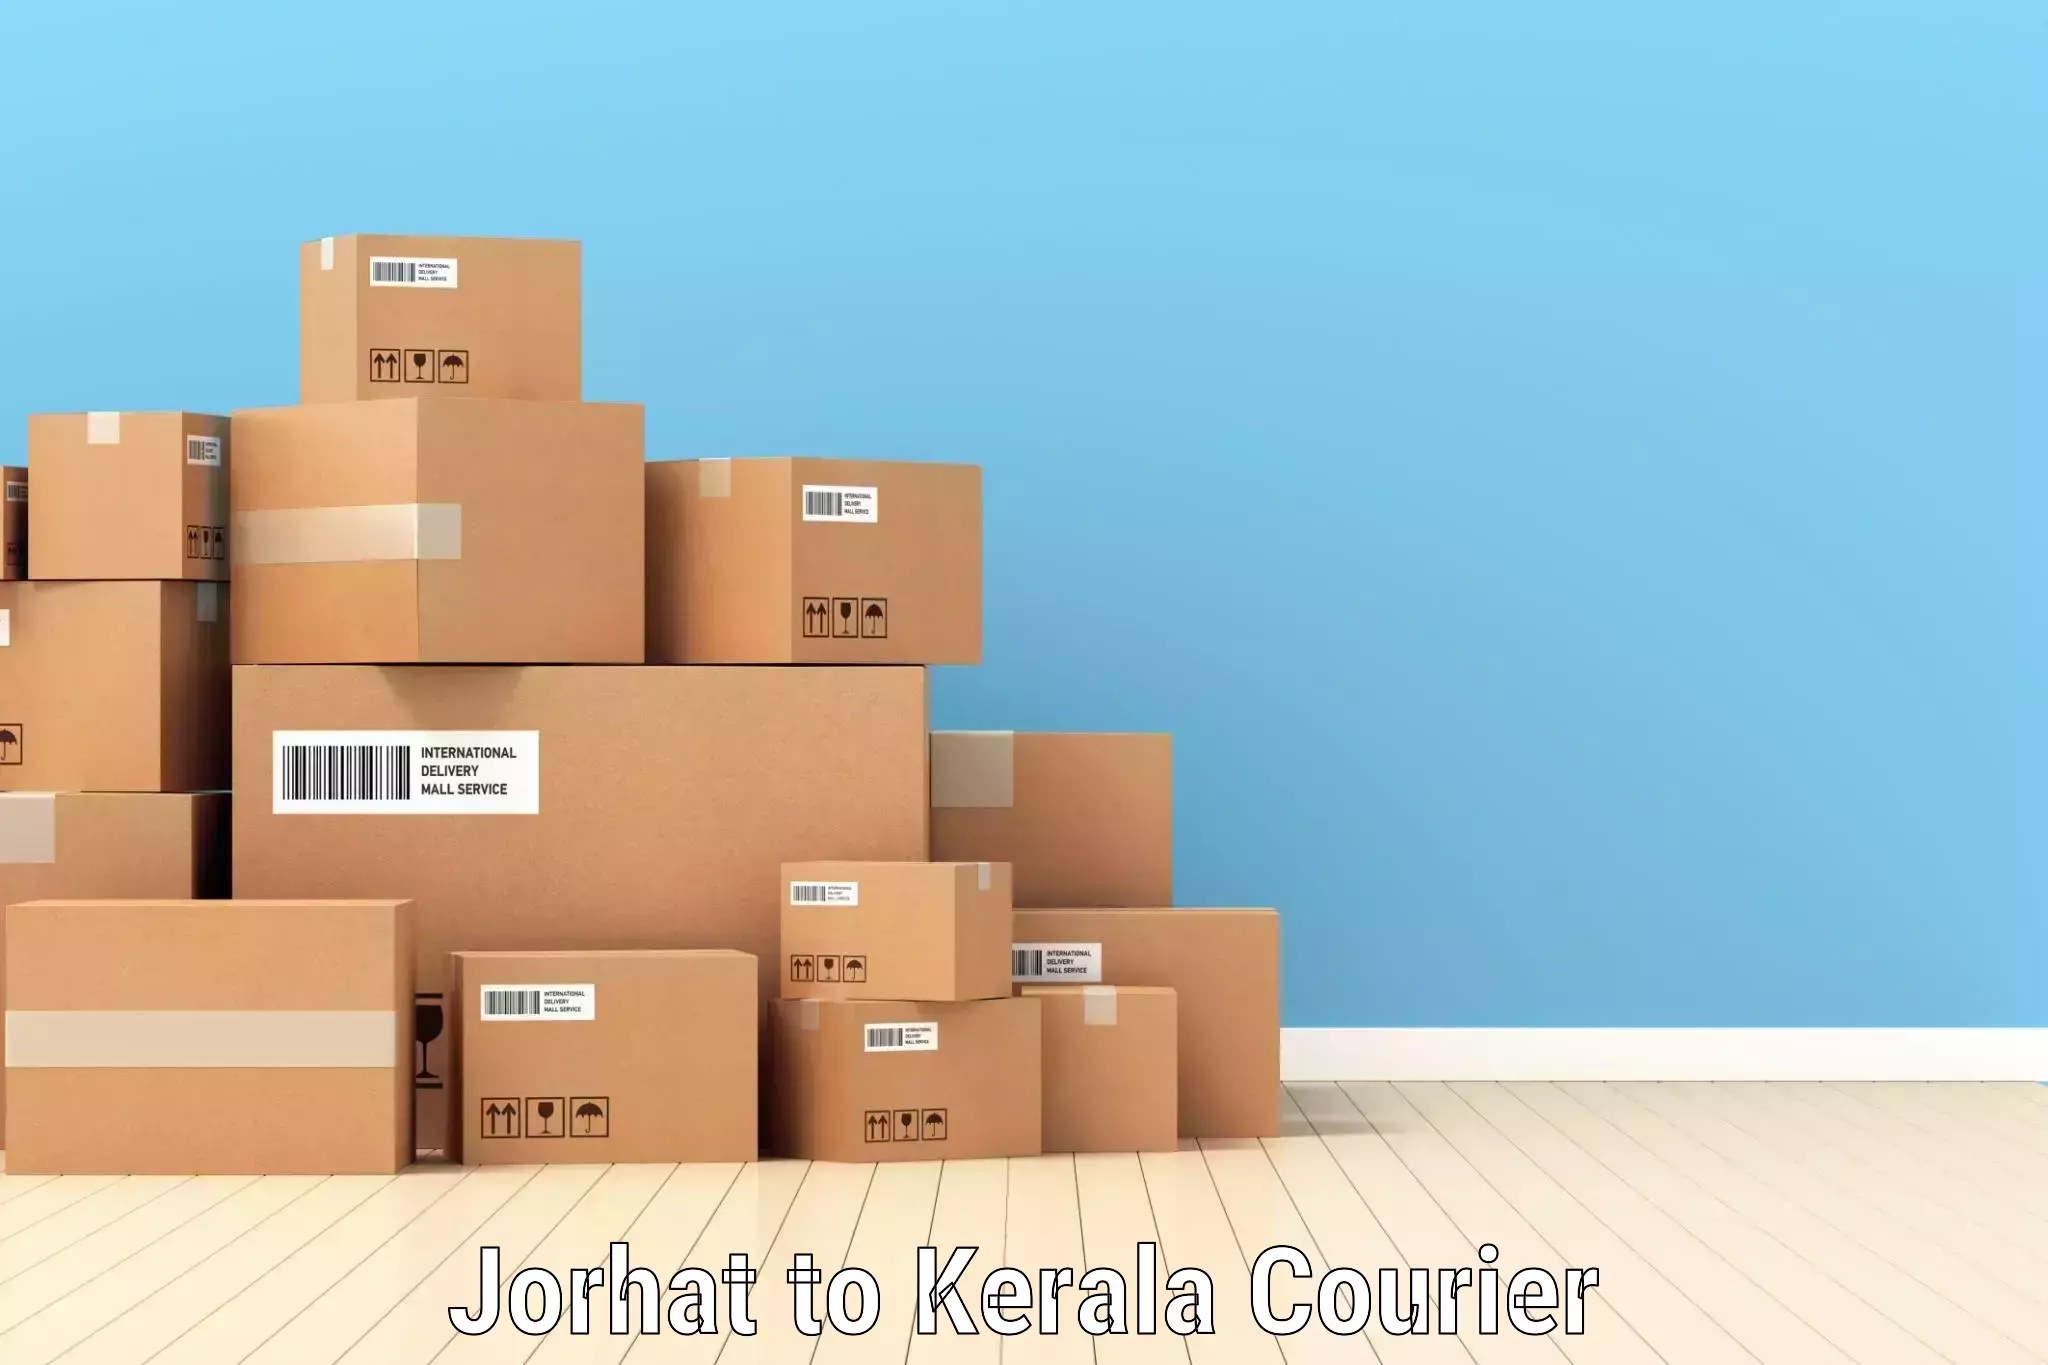 Efficient courier operations Jorhat to Panthalam